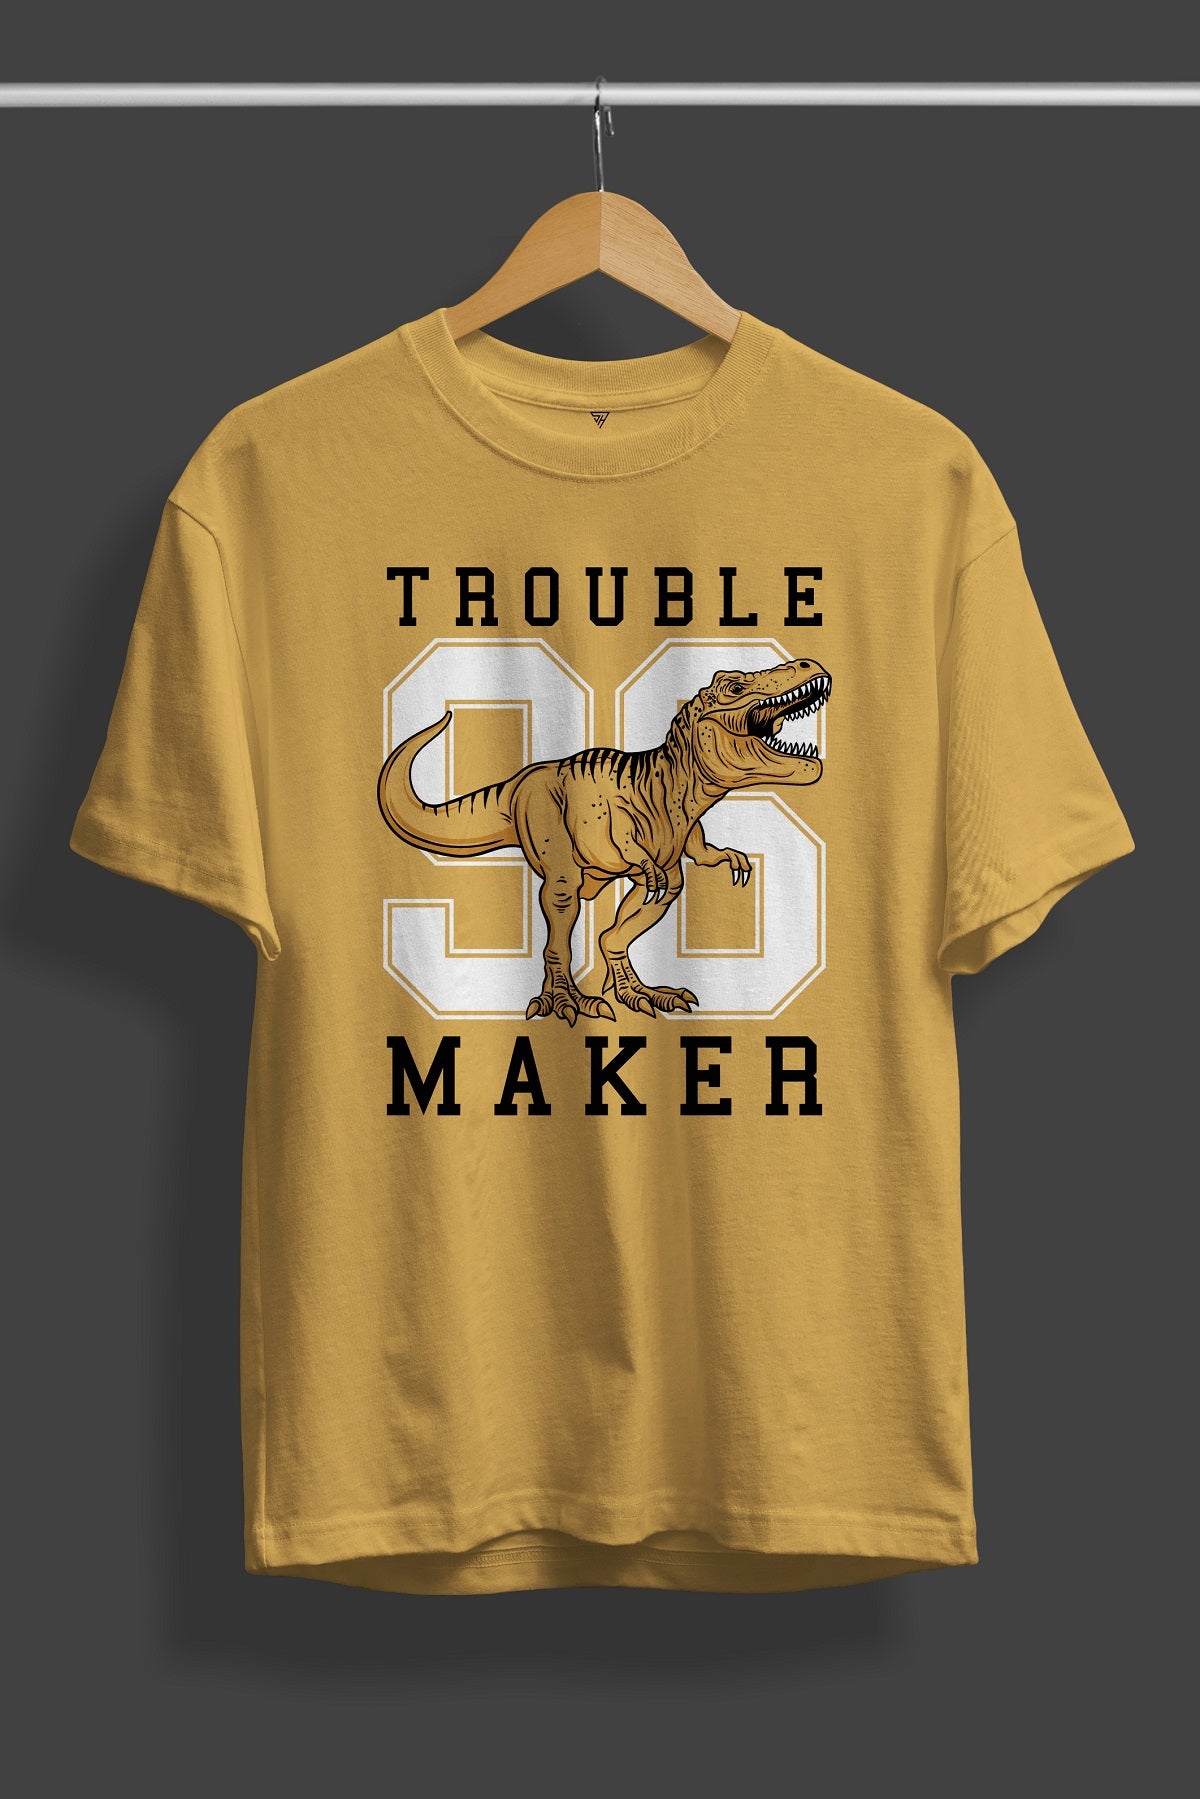 Trouble 96 Maker Graphic T-Shirt - SQUIREHOOD